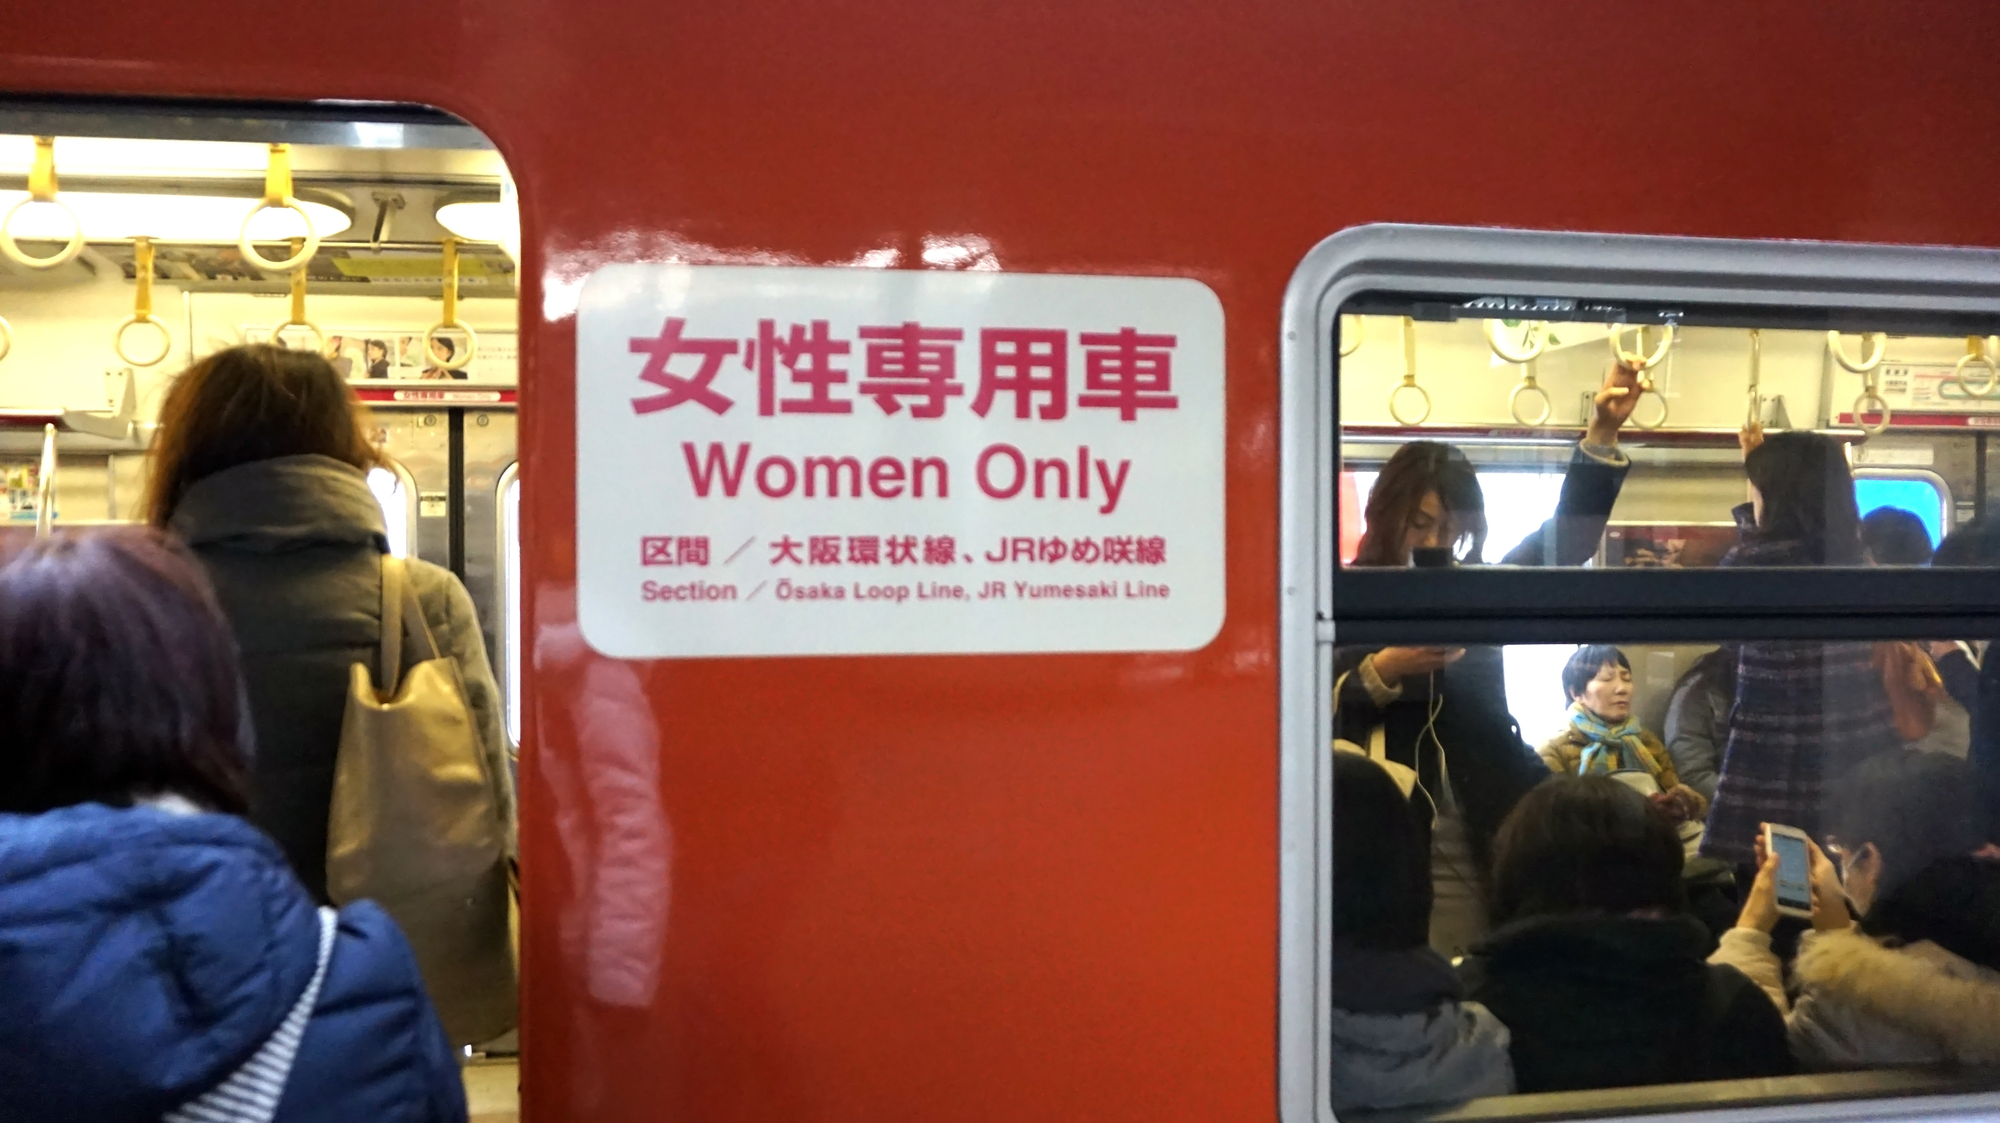 woman only train in Japan